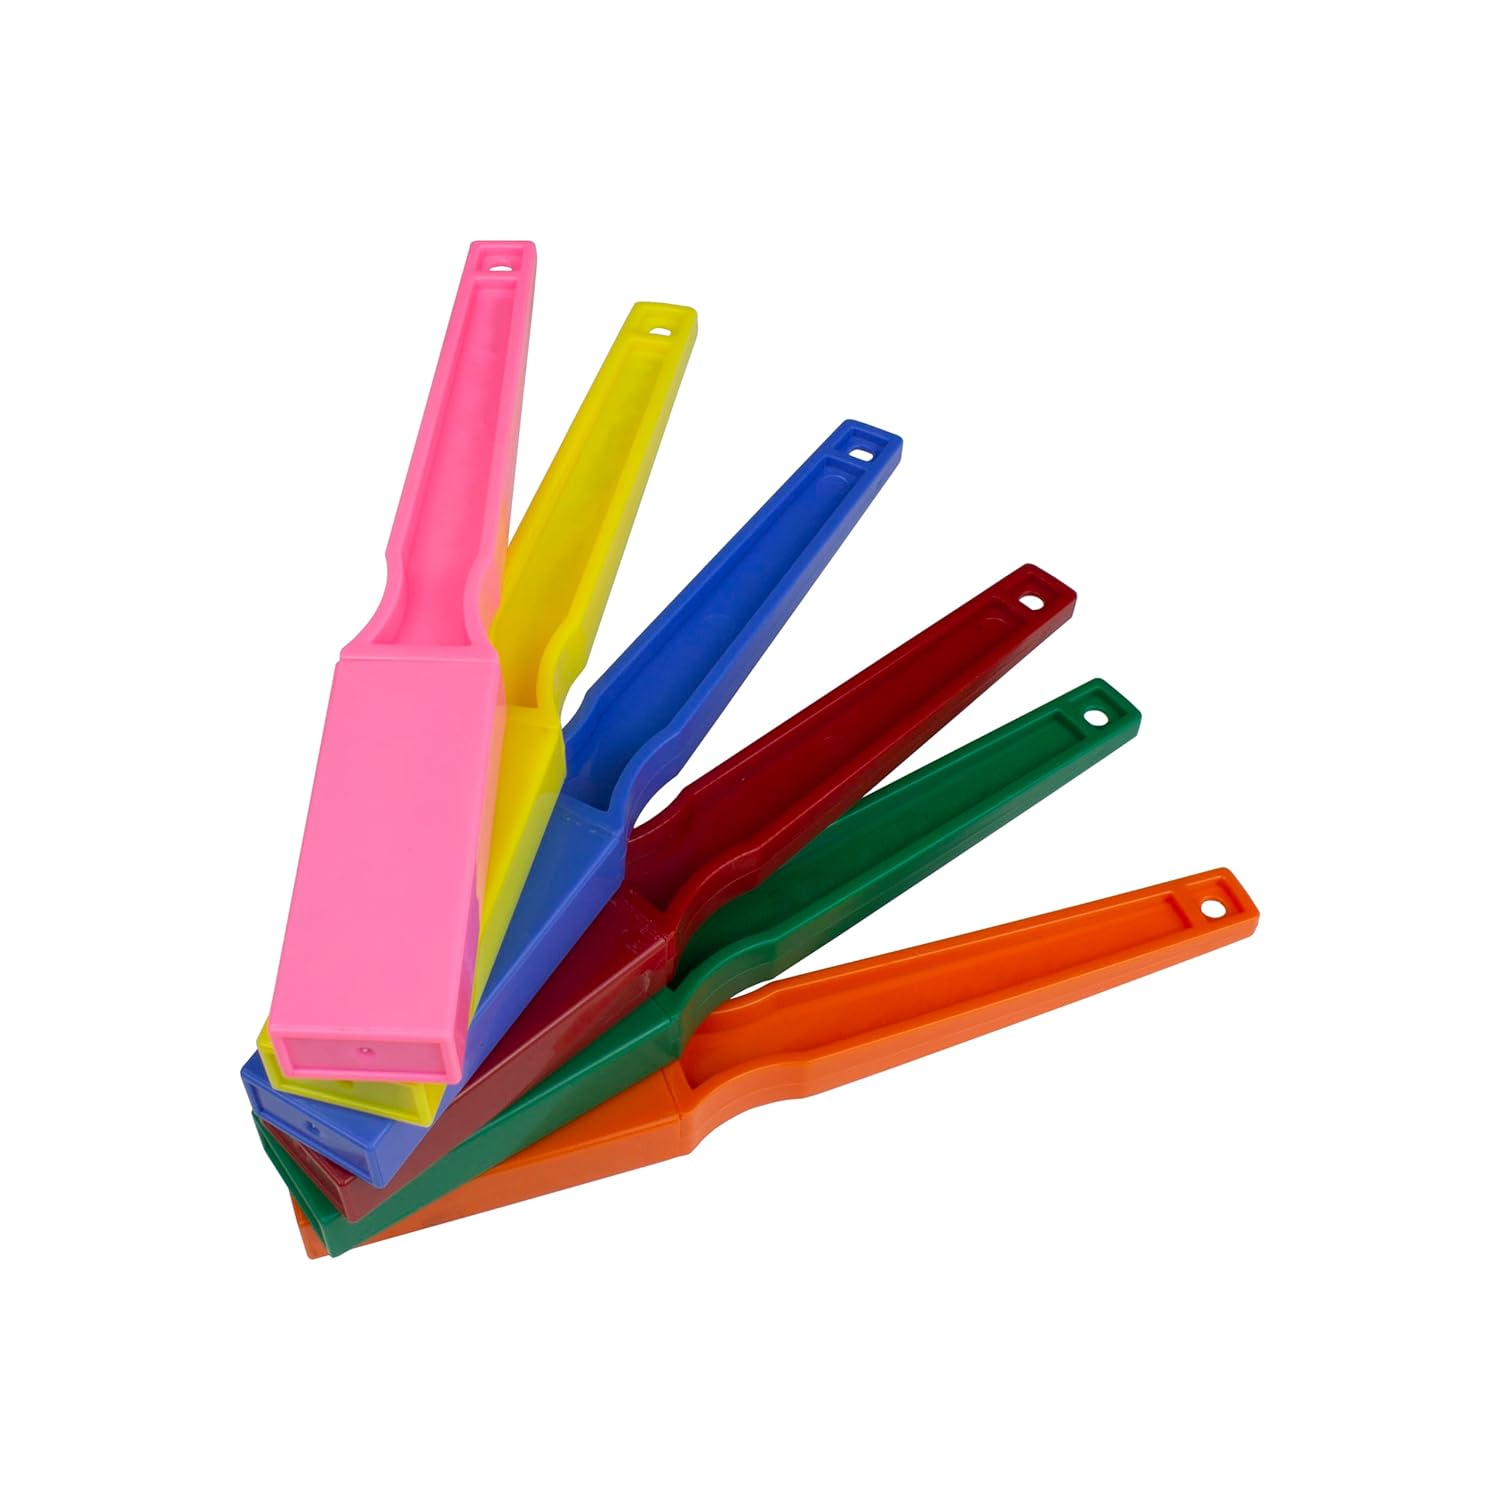 plastic wands with magnets in them